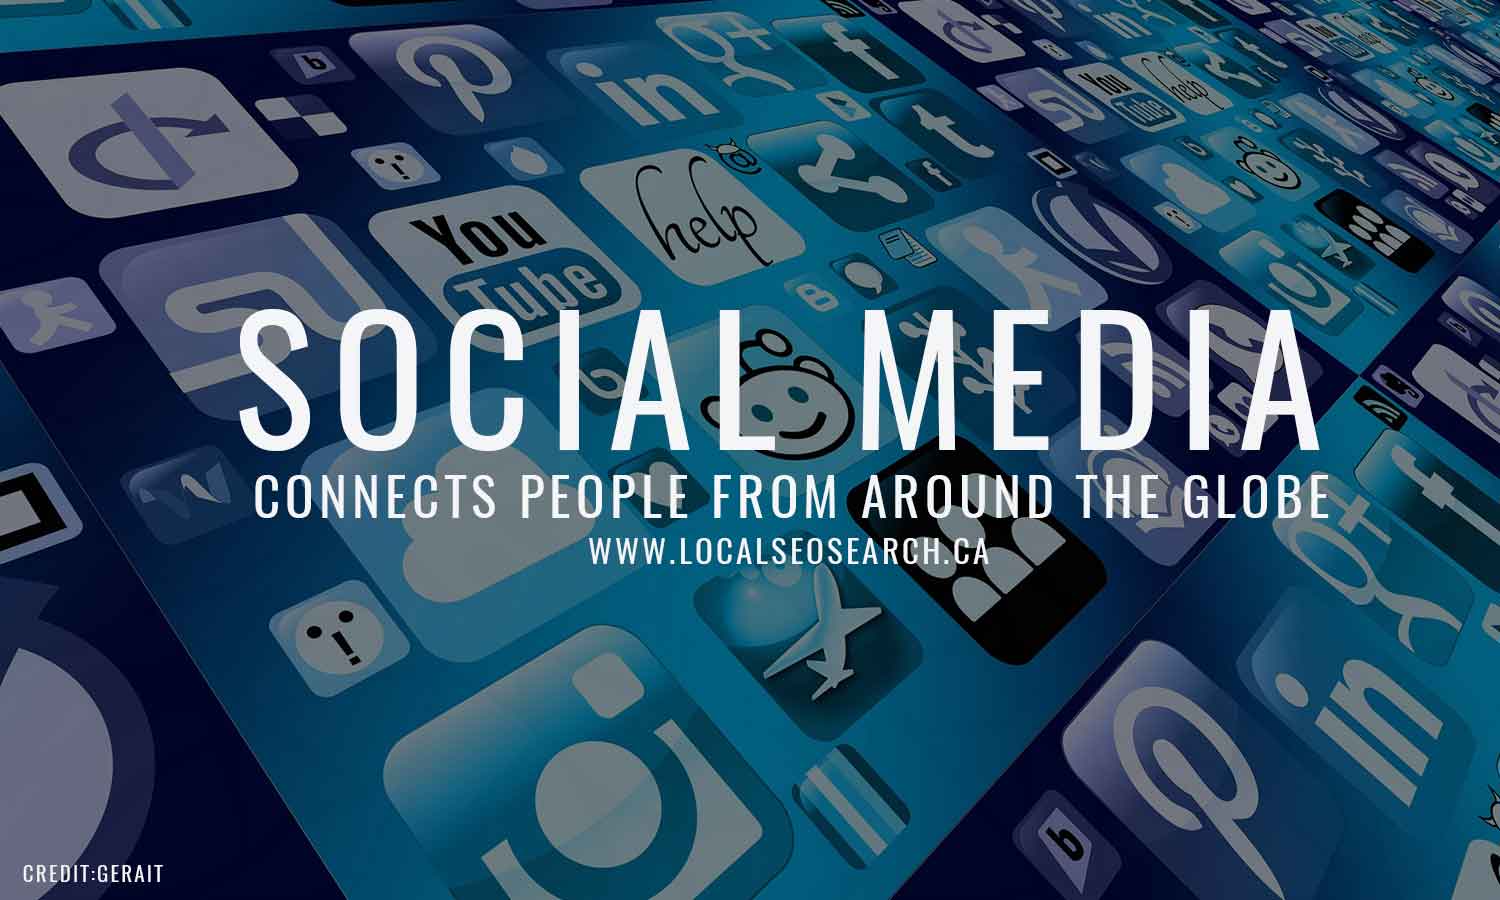 Social Media connects people from around the globe